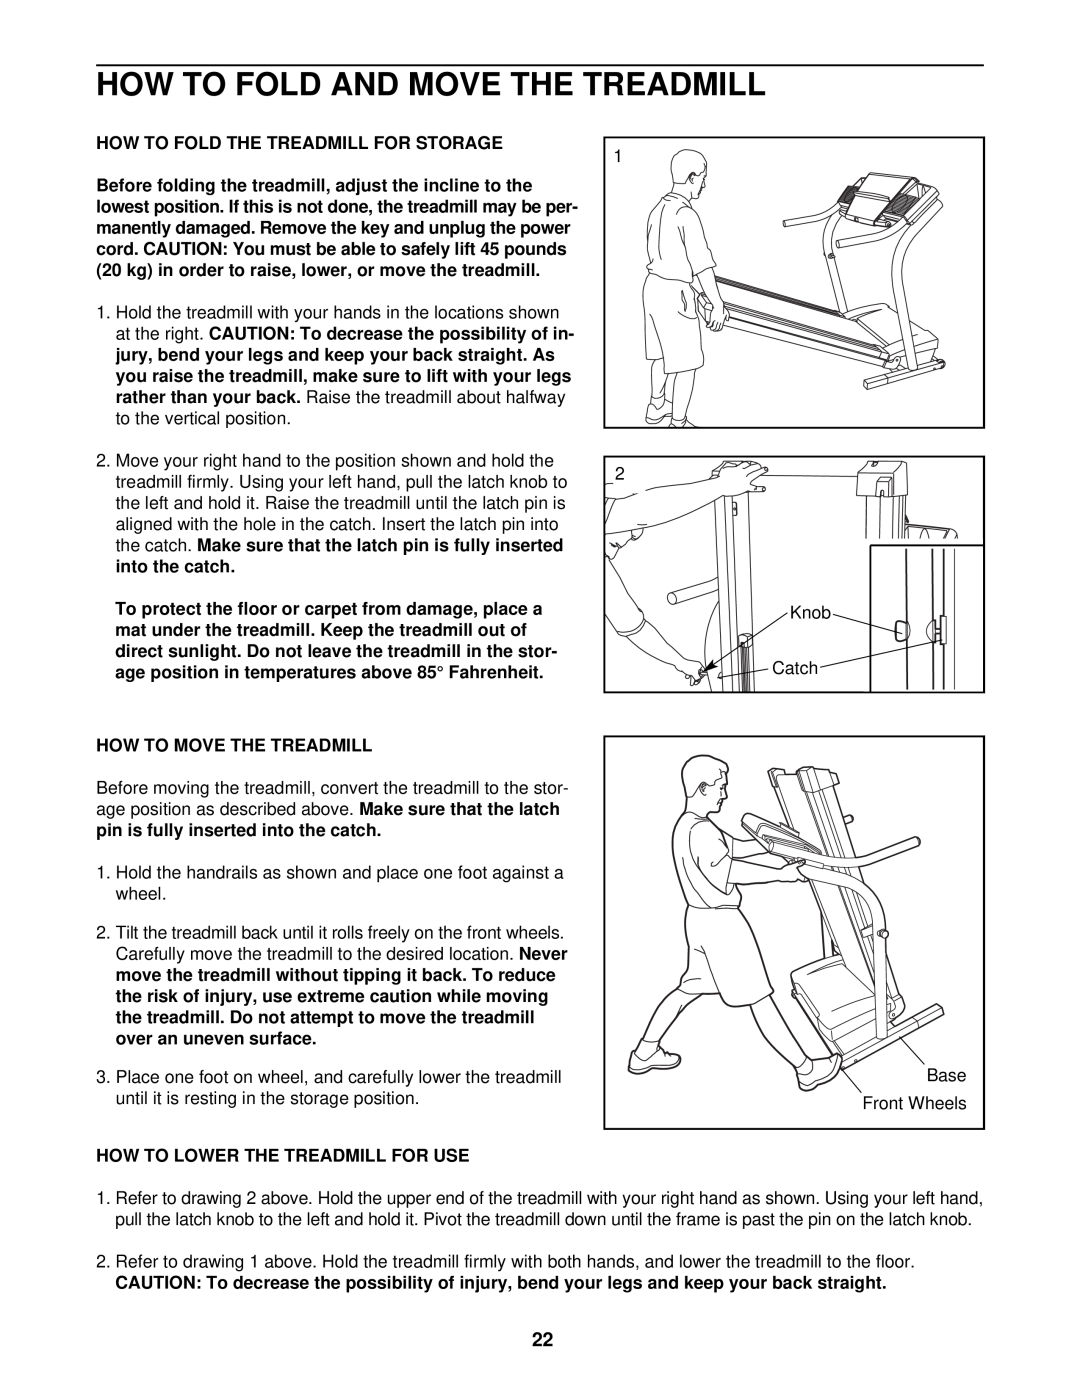 NordicTrack NTL99030 How To Fold And Move The Treadmill, How To Fold The Treadmill For Storage, than your back, to the 